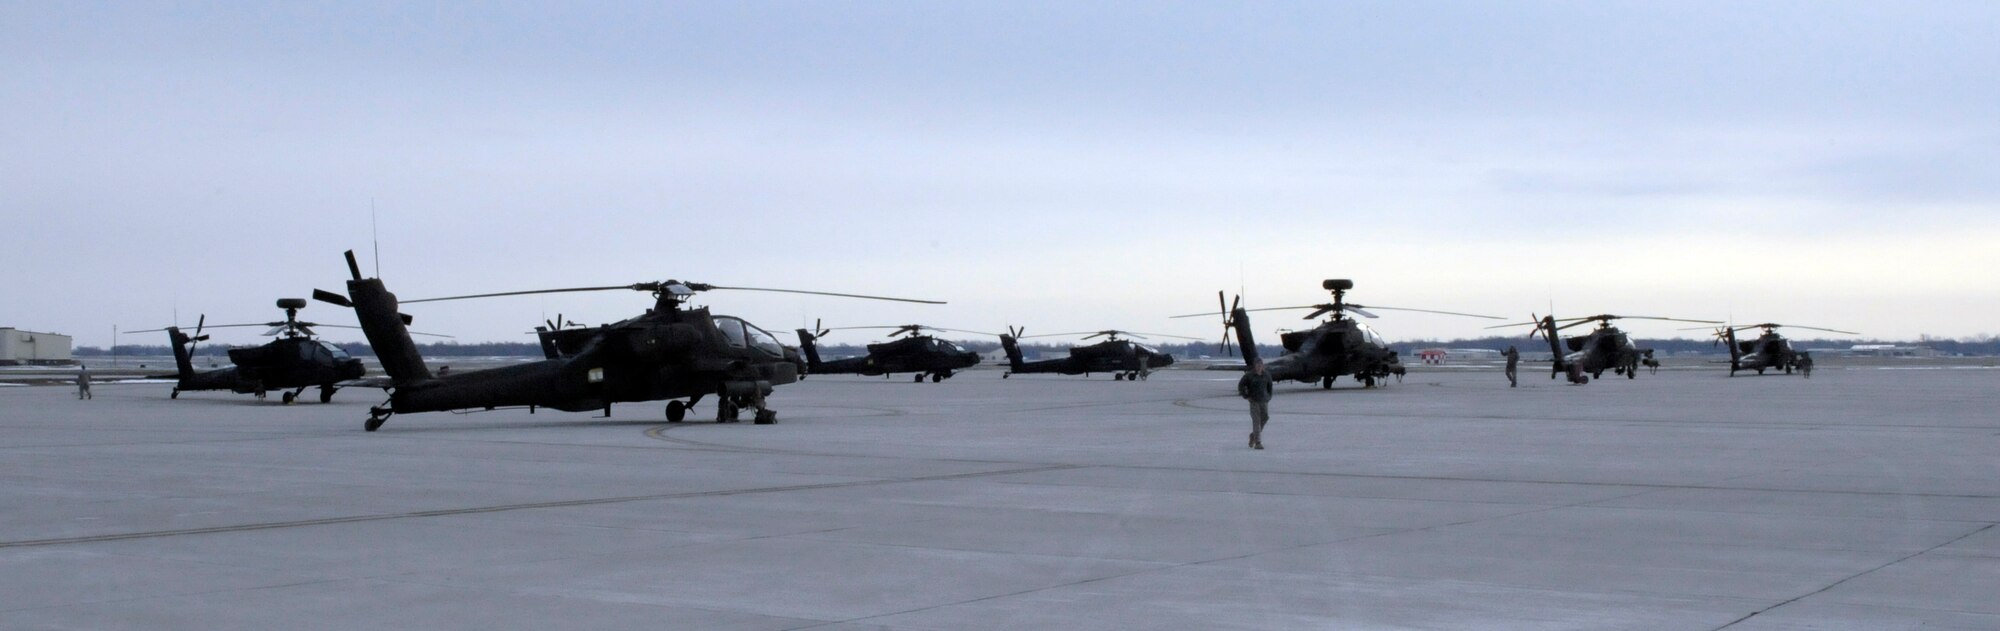 U.S. Army Ah-64 Apache Longbows from the 1-135th Attack Reconnaissance Battalion at Whiteman Air Force Base, Mo., prepare March 27, 2013, for their deployment to Afghanistan. The aircraft will stop in Texas for more training before making their way to Afghanistan. (U.S. Air Force photo by Airman 1st Class Shelby R. Orozco/Released)